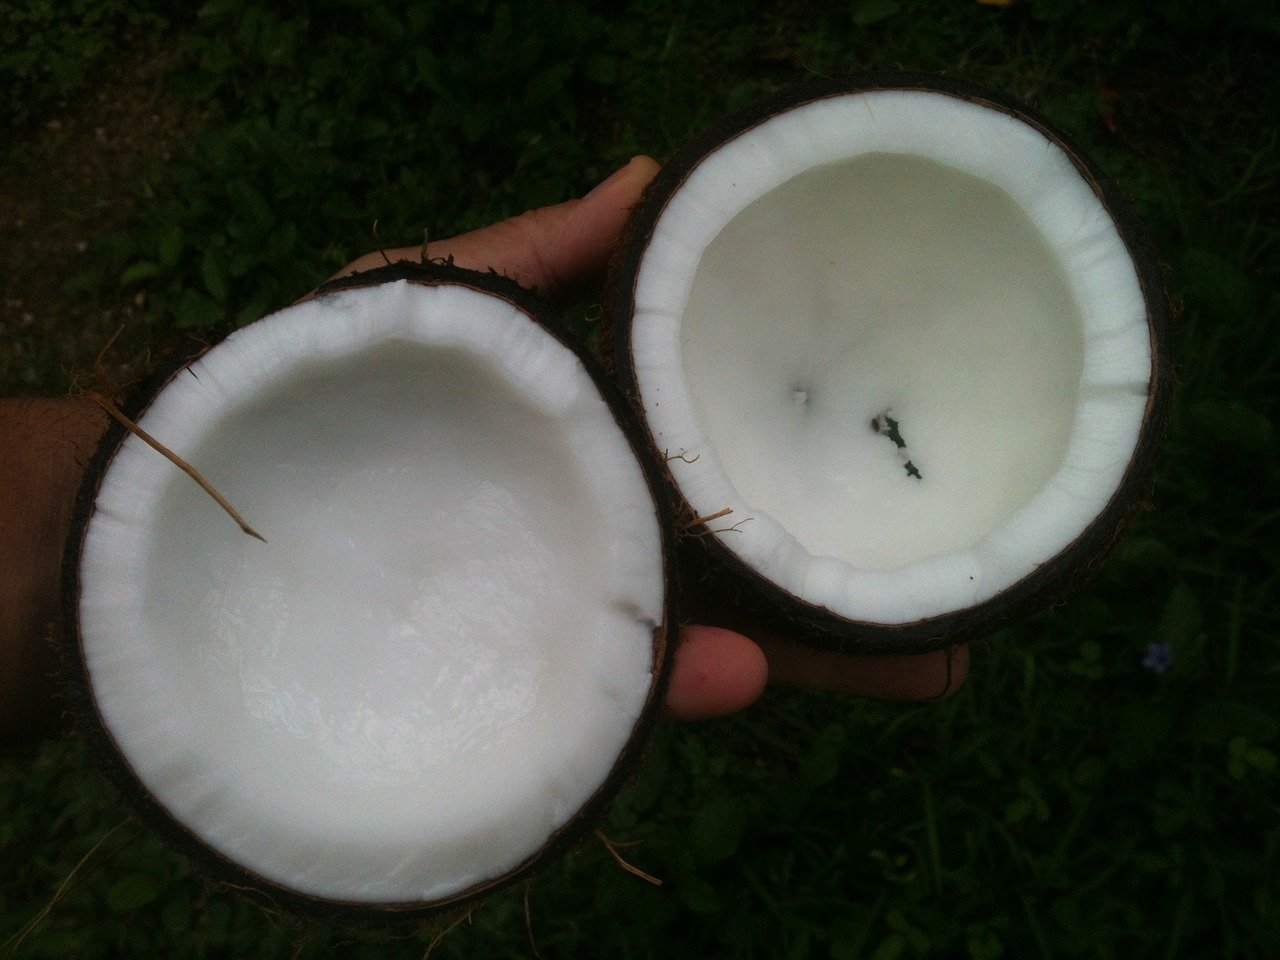 How does coconut oil affect health?, coconut oil benefits for skin, coconut oil benefits and side effects, coconut oil benefits for hair, coconut oil weight loss, how to eat coconut oil, coconut oil benefits mayo clinic, coconut oil for teeth, how to use coconut oil,